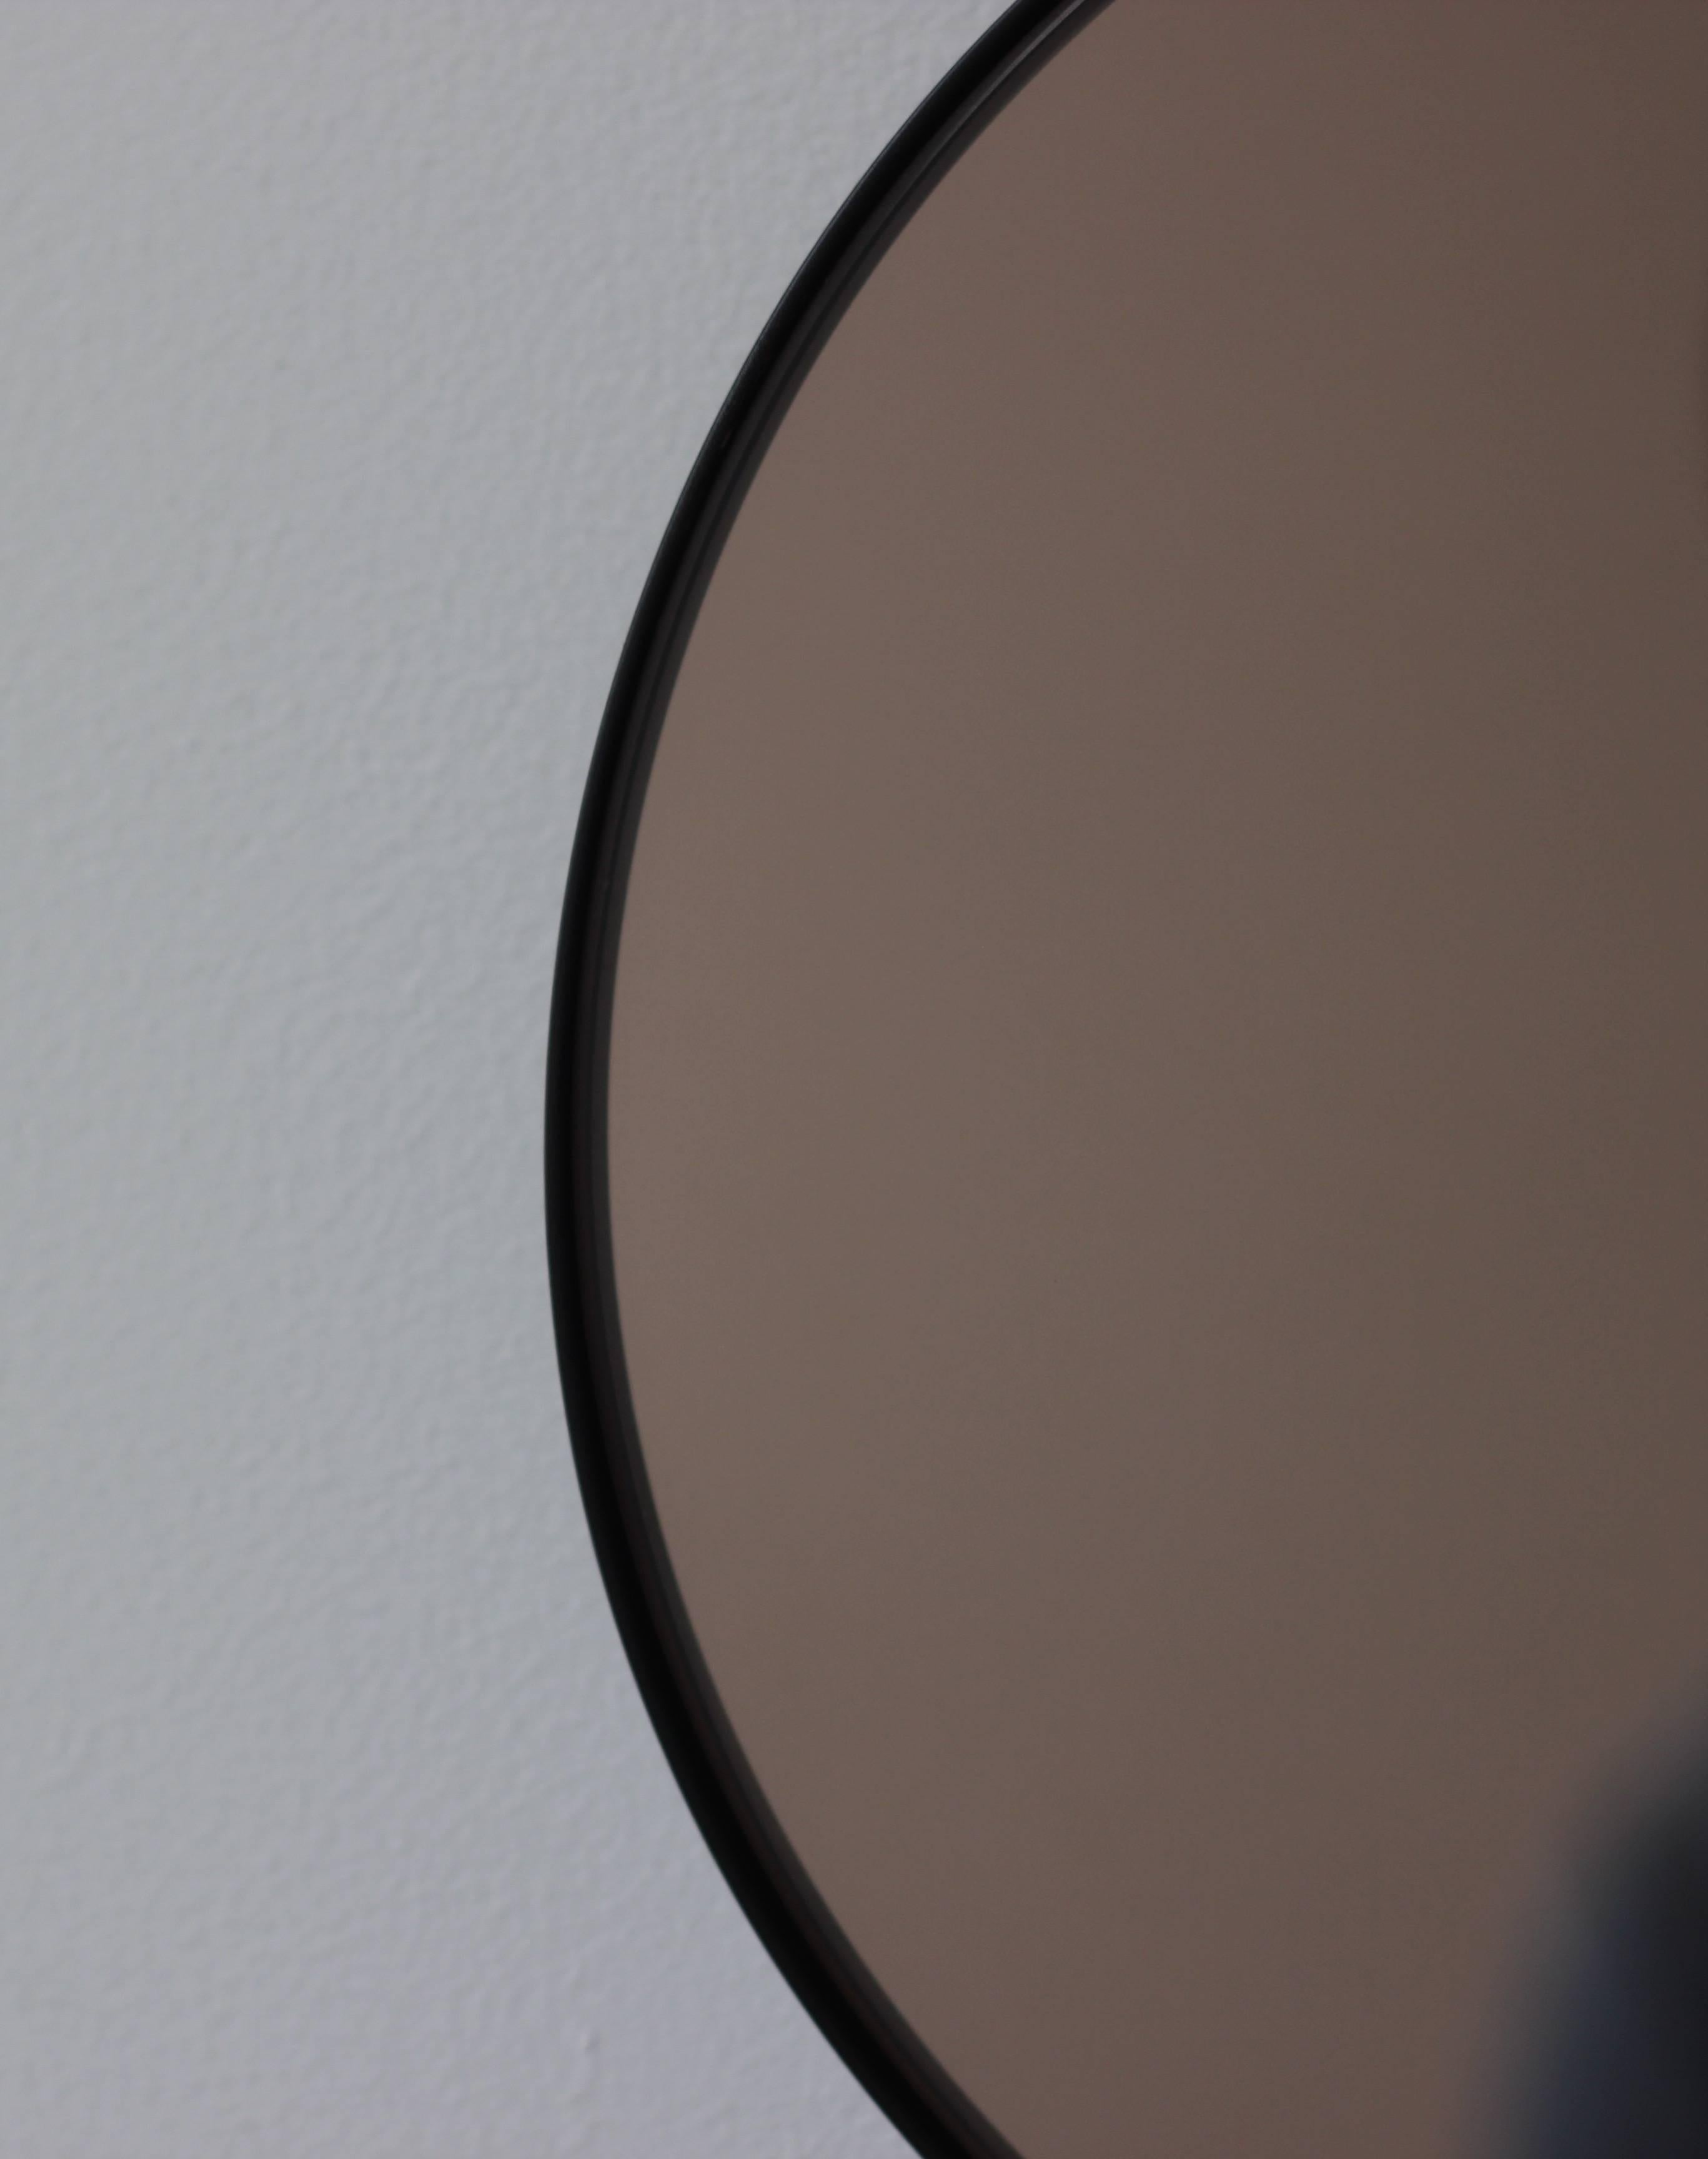 Contemporary Orbis™ round bronze tinted mirror with a minimalist aluminium powder coated black frame. Designed and handcrafted in London, UK.

Our mirrors are designed with an integrated French cleat (split batten) system that ensures the mirror is